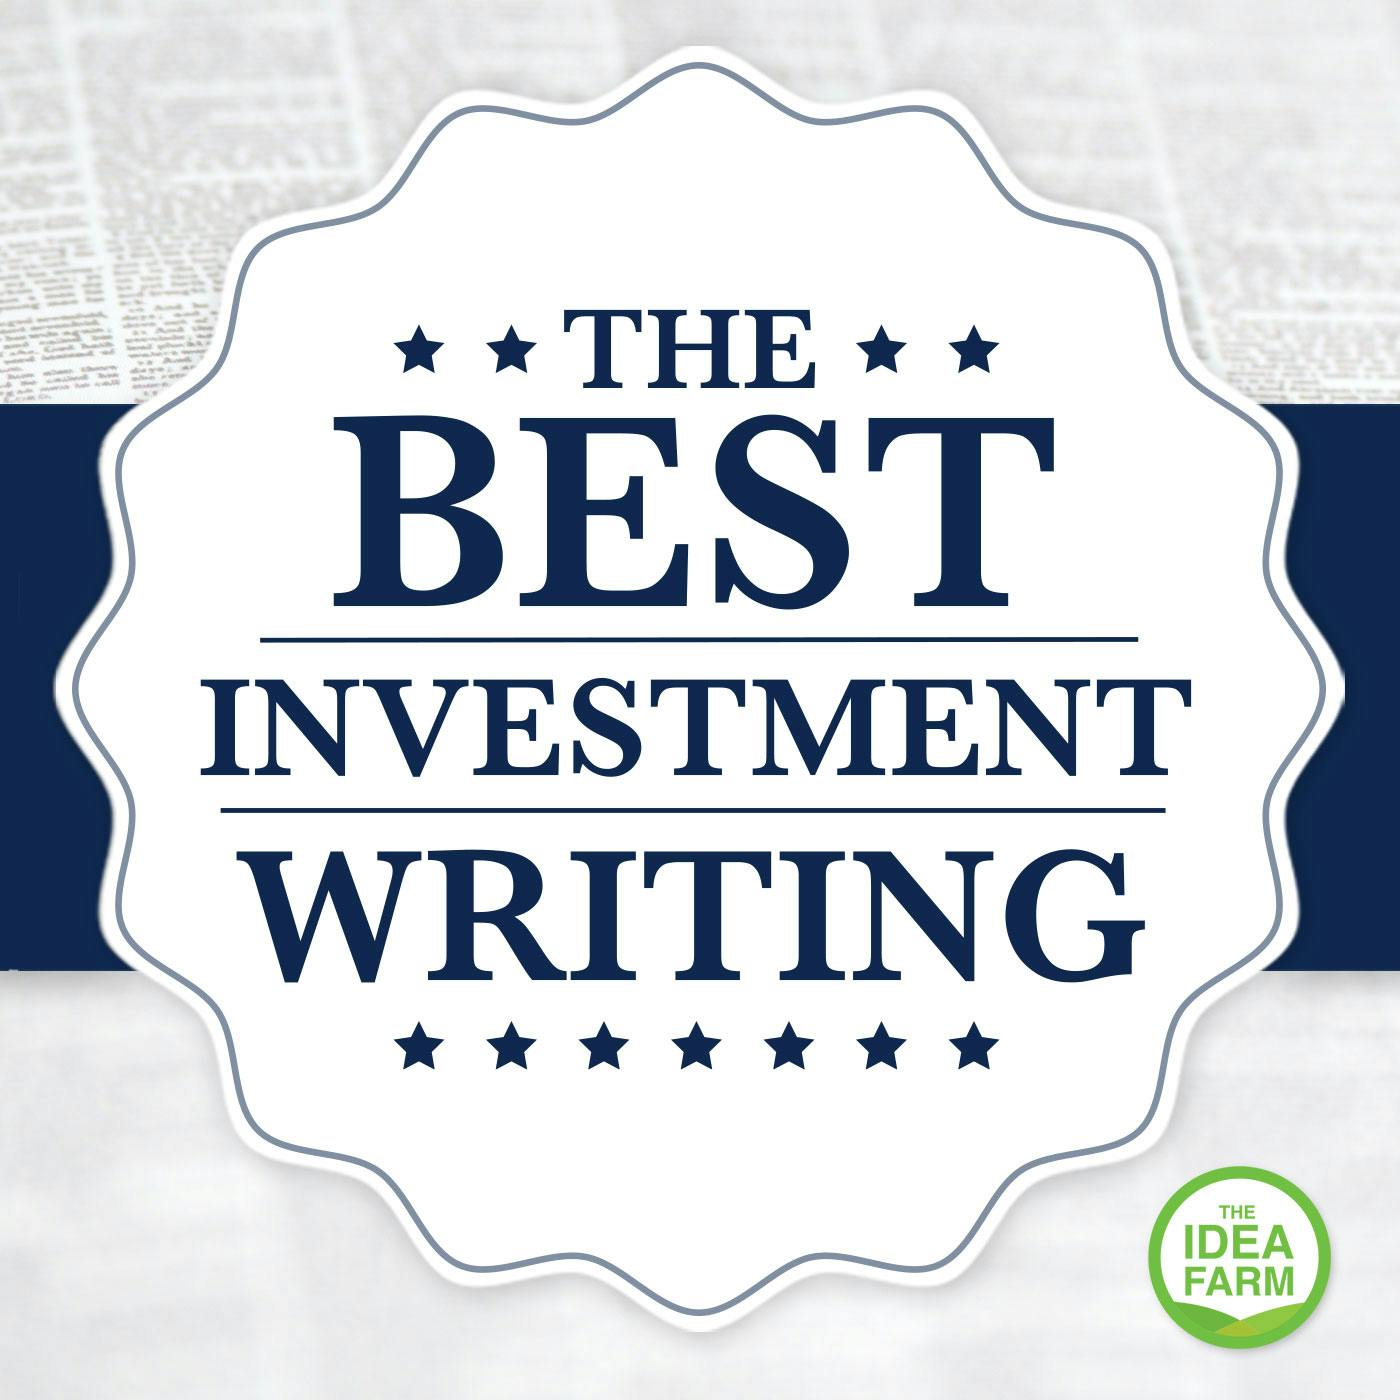 The Best Investment Writing Volume 3: Gary Antonacci – Extended Backtest of Global Equities Momentum